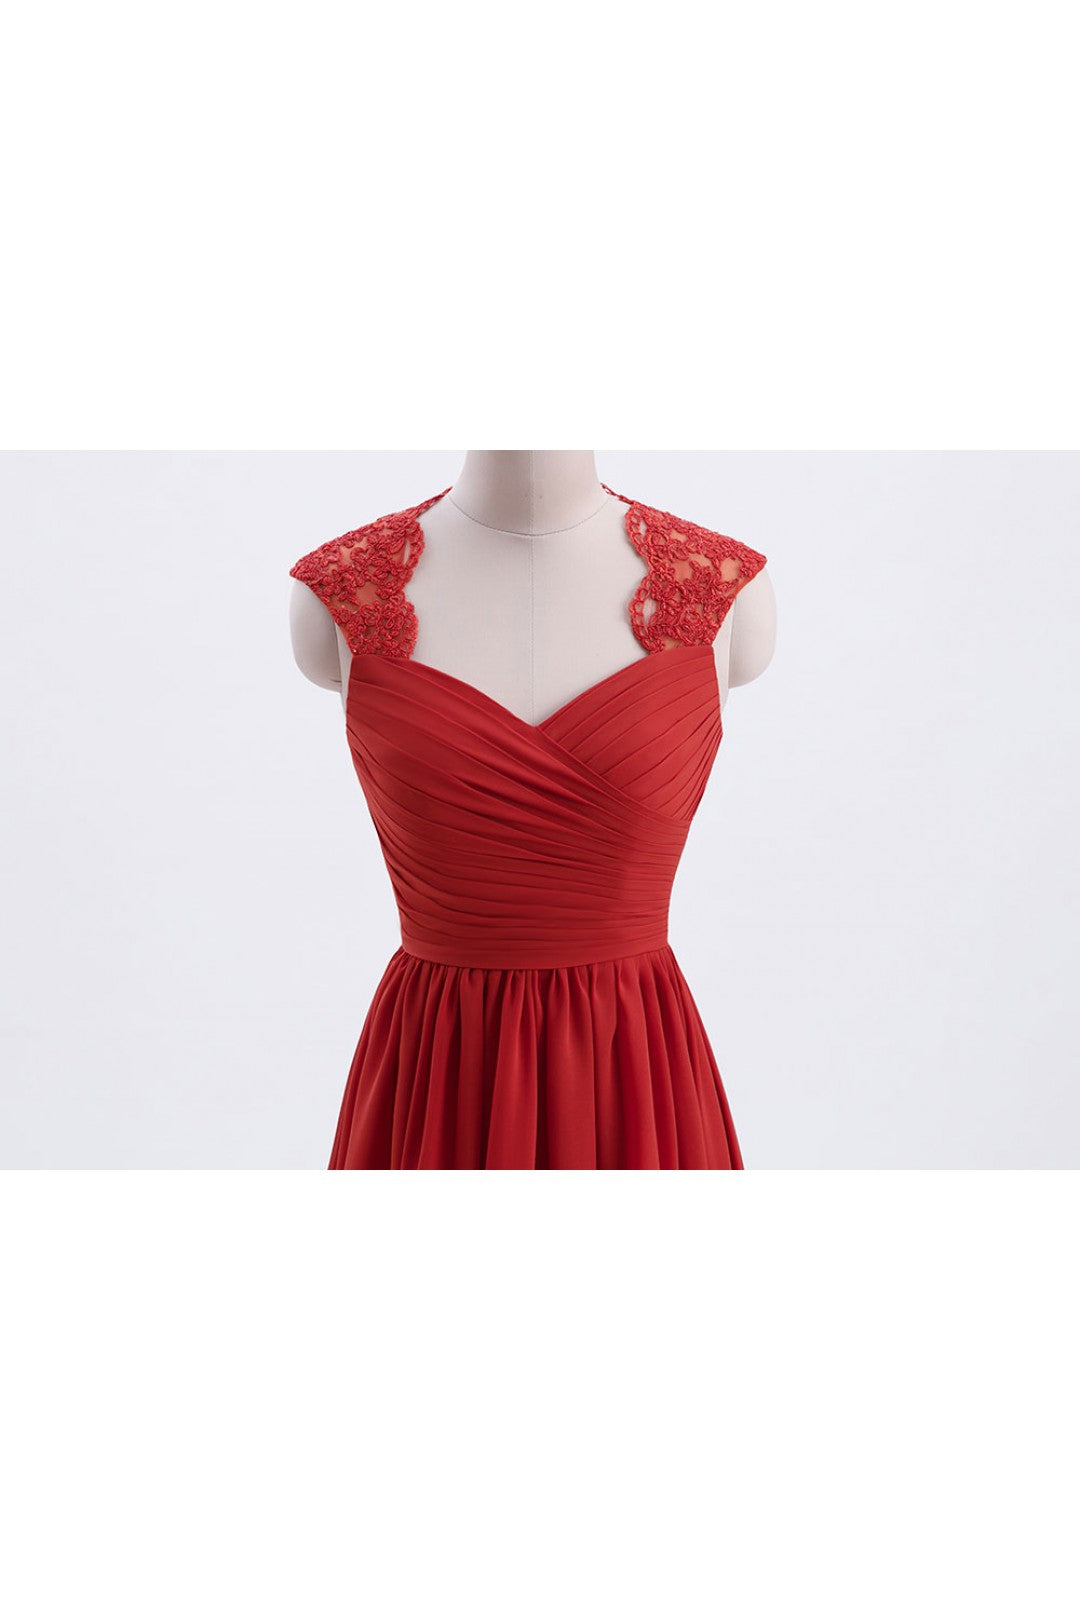 Formal Dress For Wedding Guests, Elegant Red Chiffon Pleated A-line Long Bridesmaid Dress